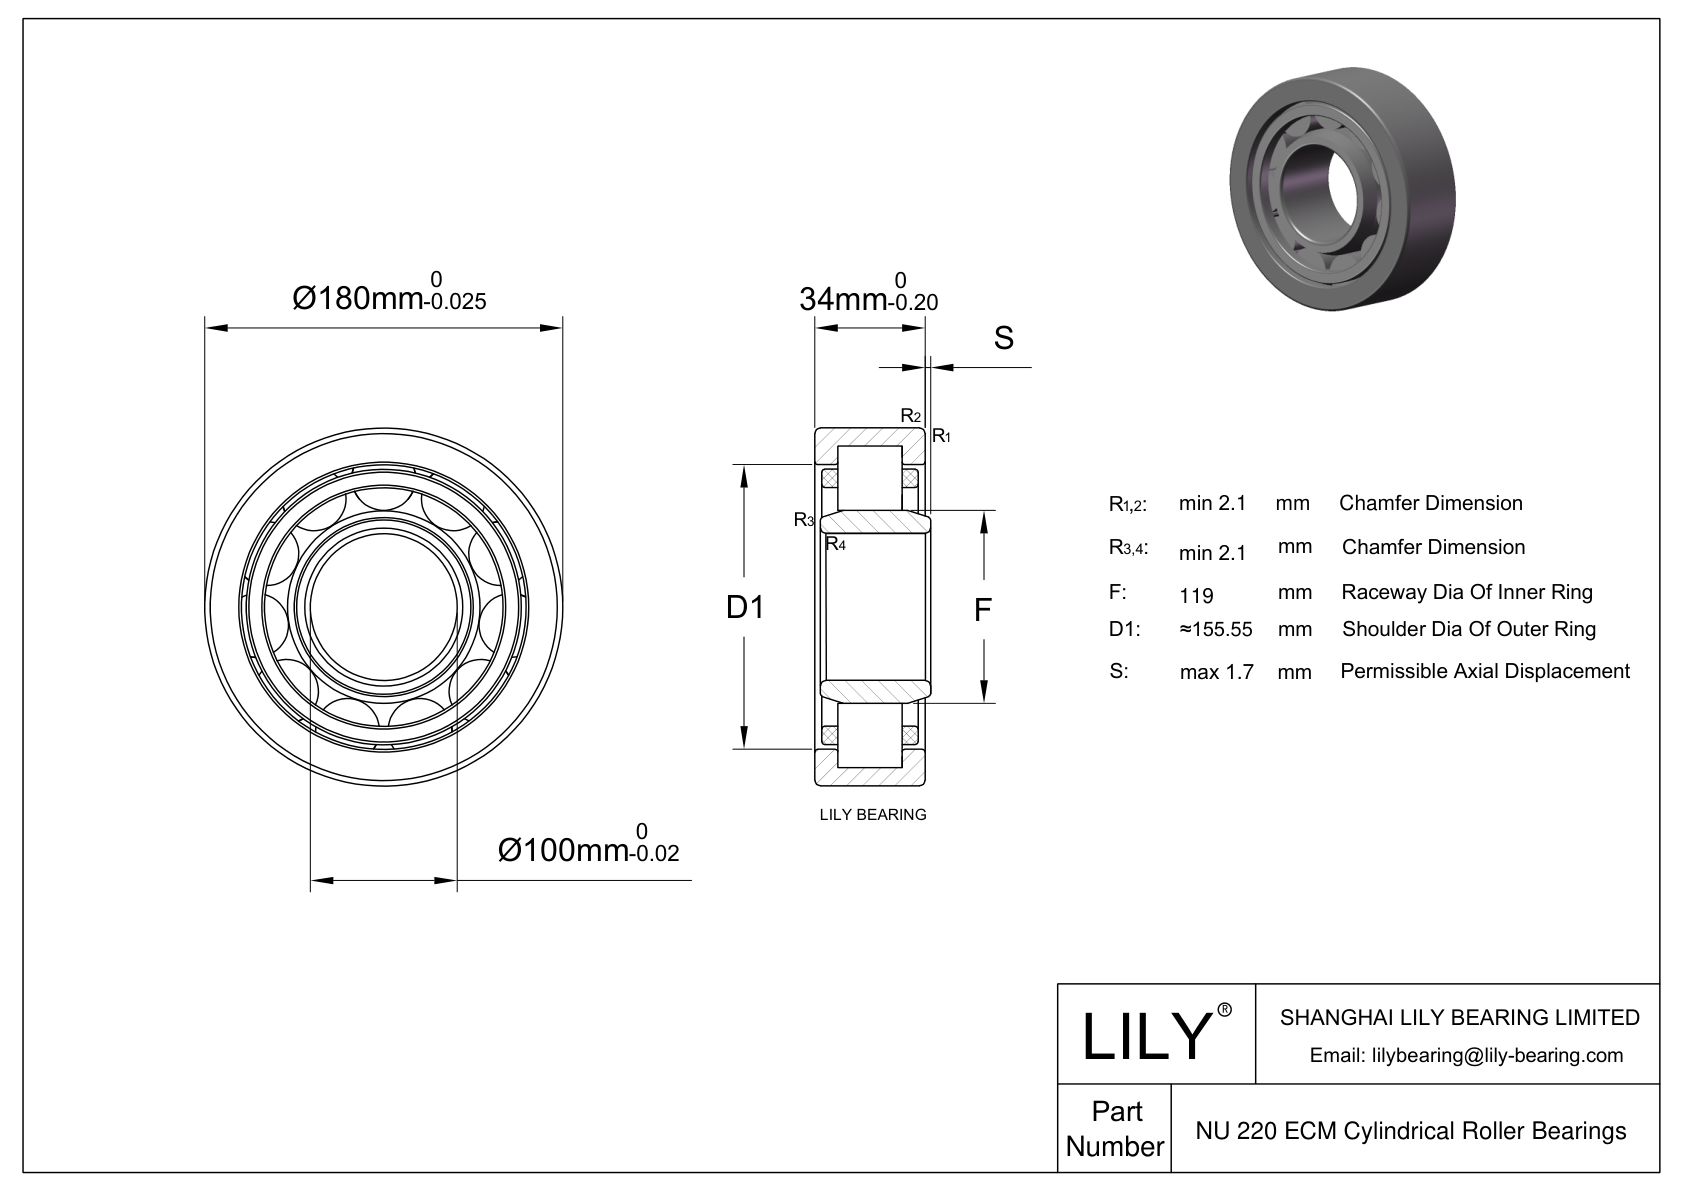 NU 220 ECM/C3VL0241 Ceramic Coated Cylindrical Roller Bearings cad drawing